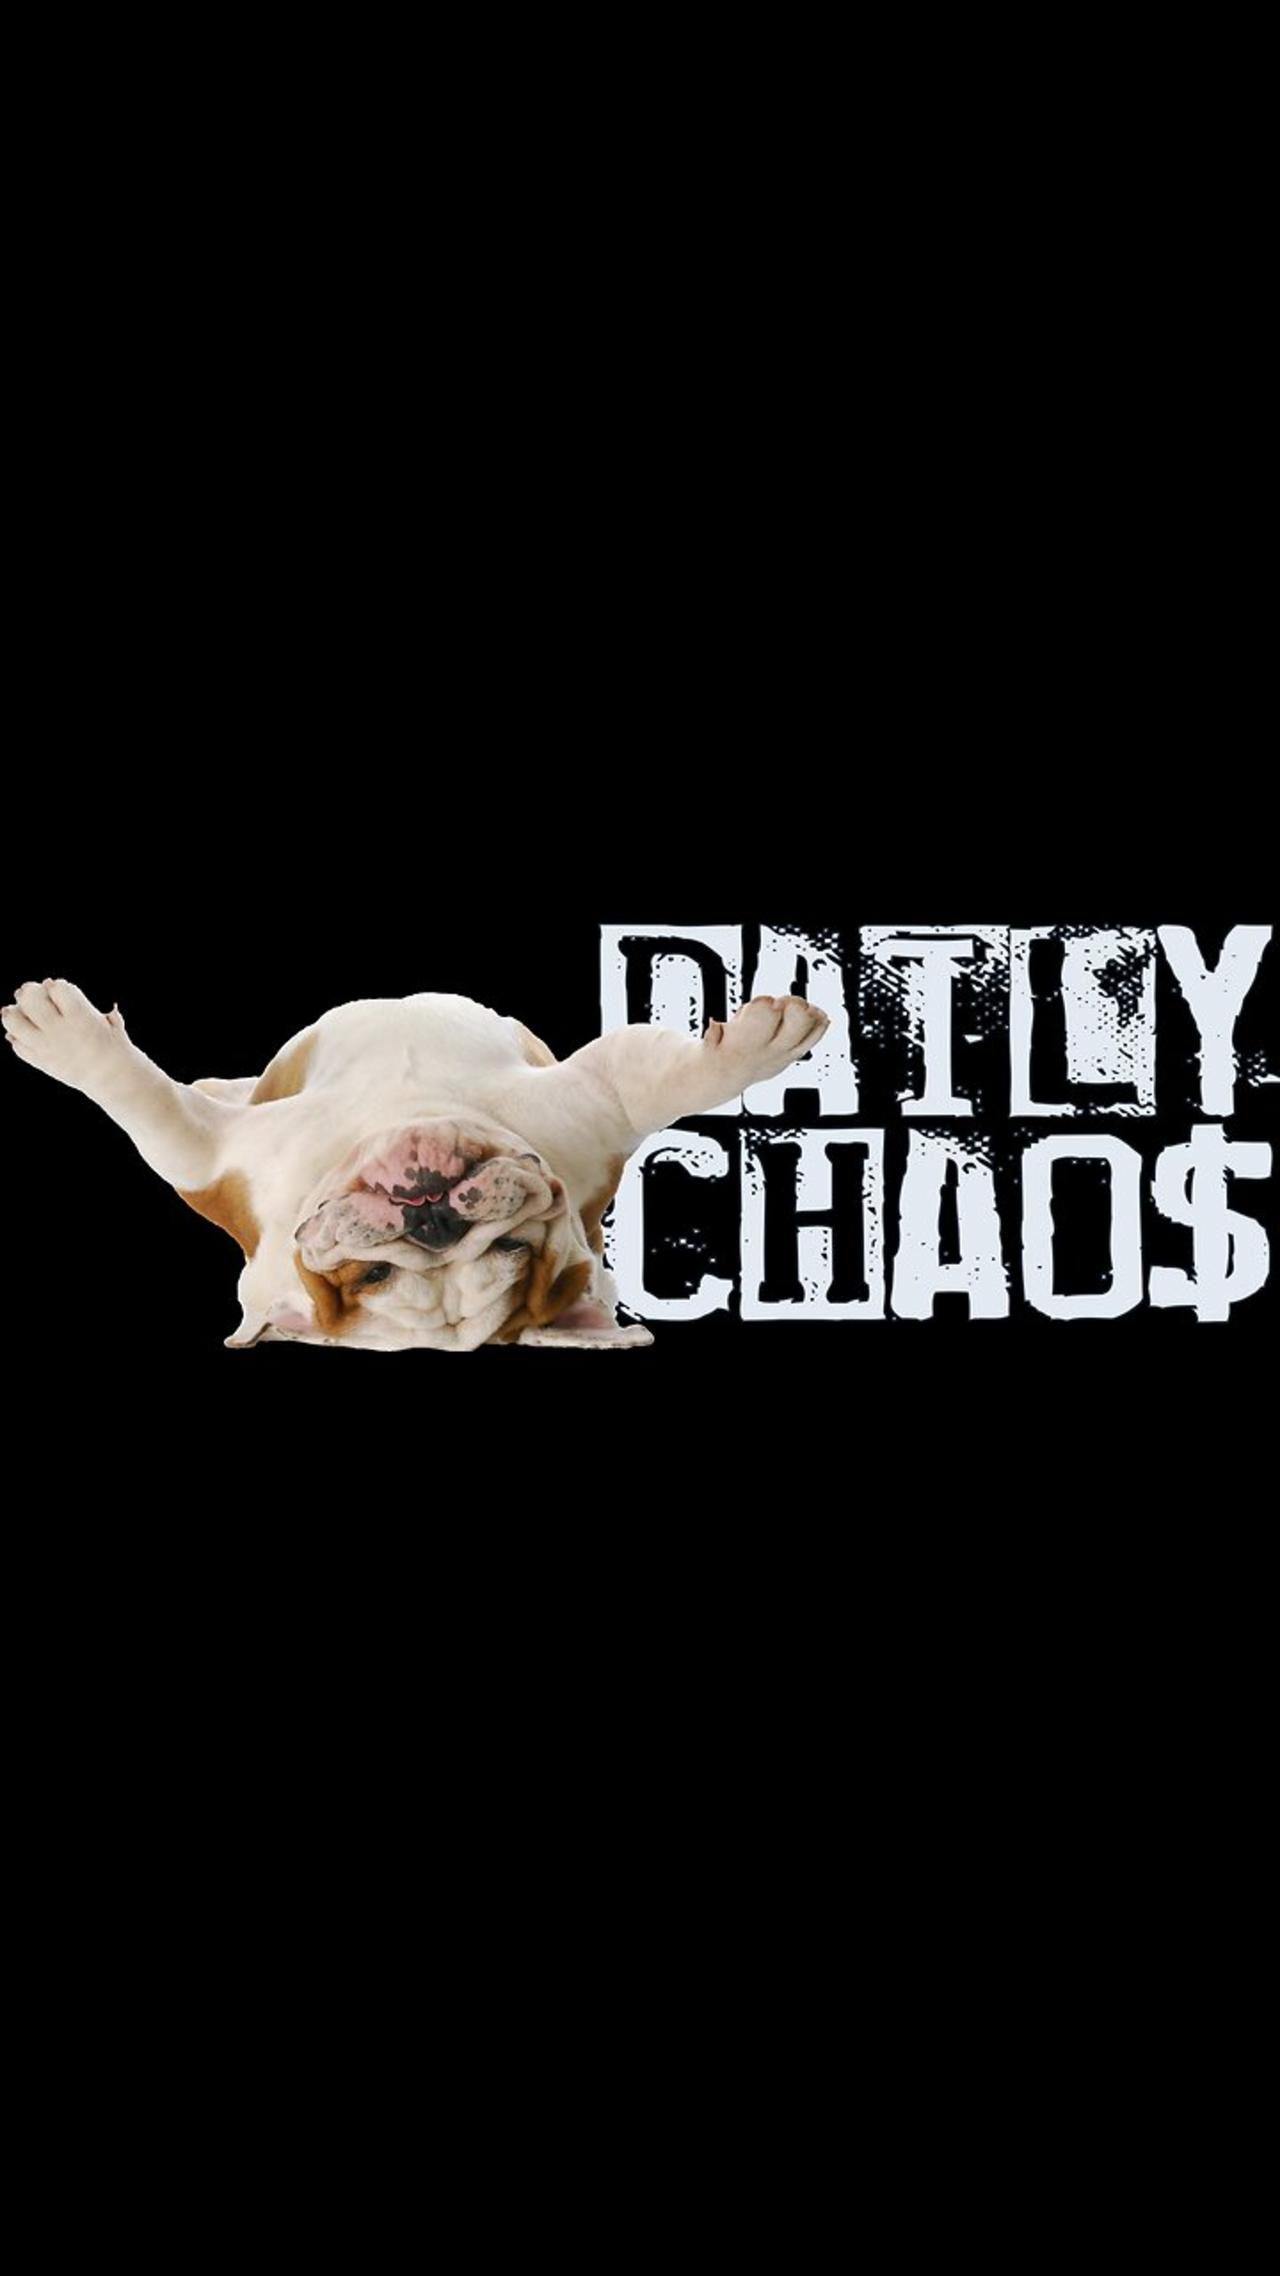 UPDATE ~ Daily Chaos